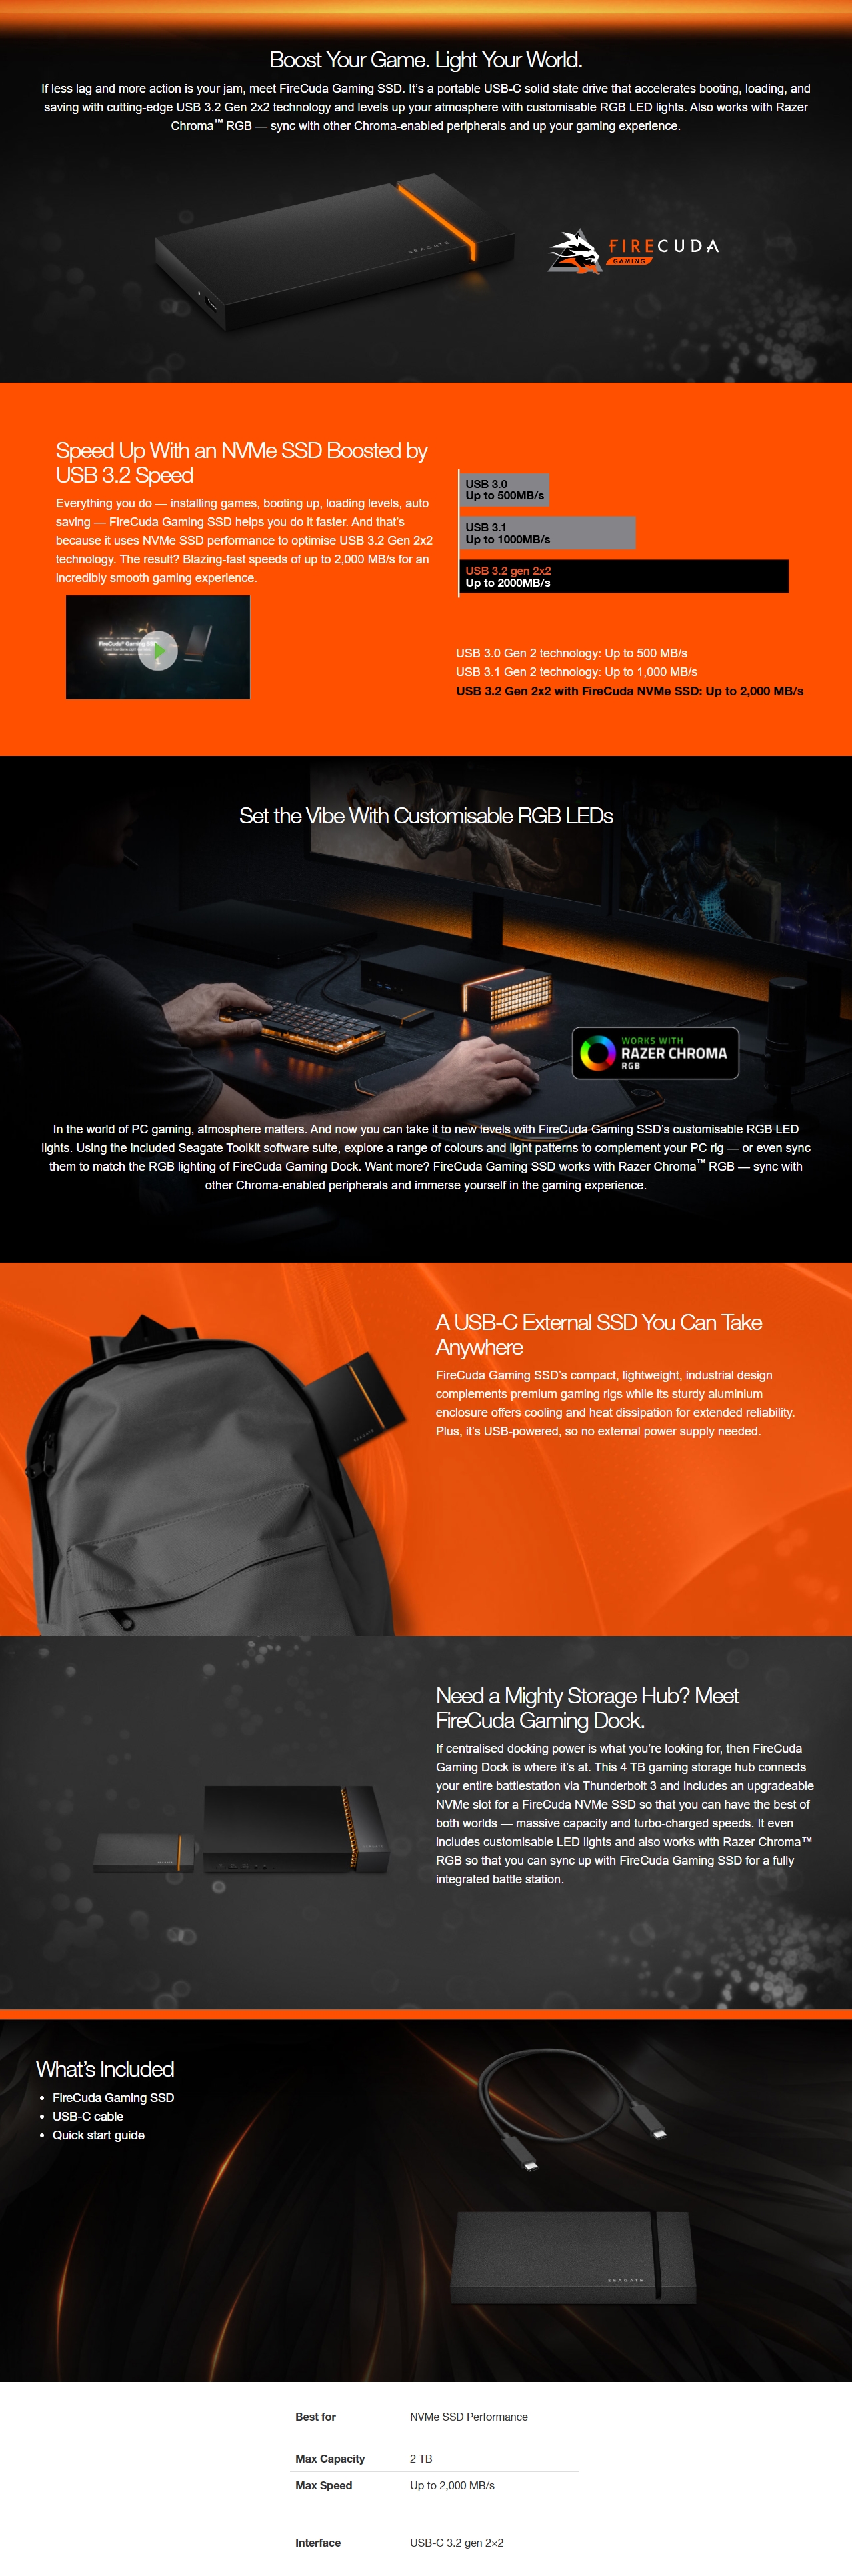 A large marketing image providing additional information about the product Seagate Firecuda Gaming 1TB External SSD - Additional alt info not provided